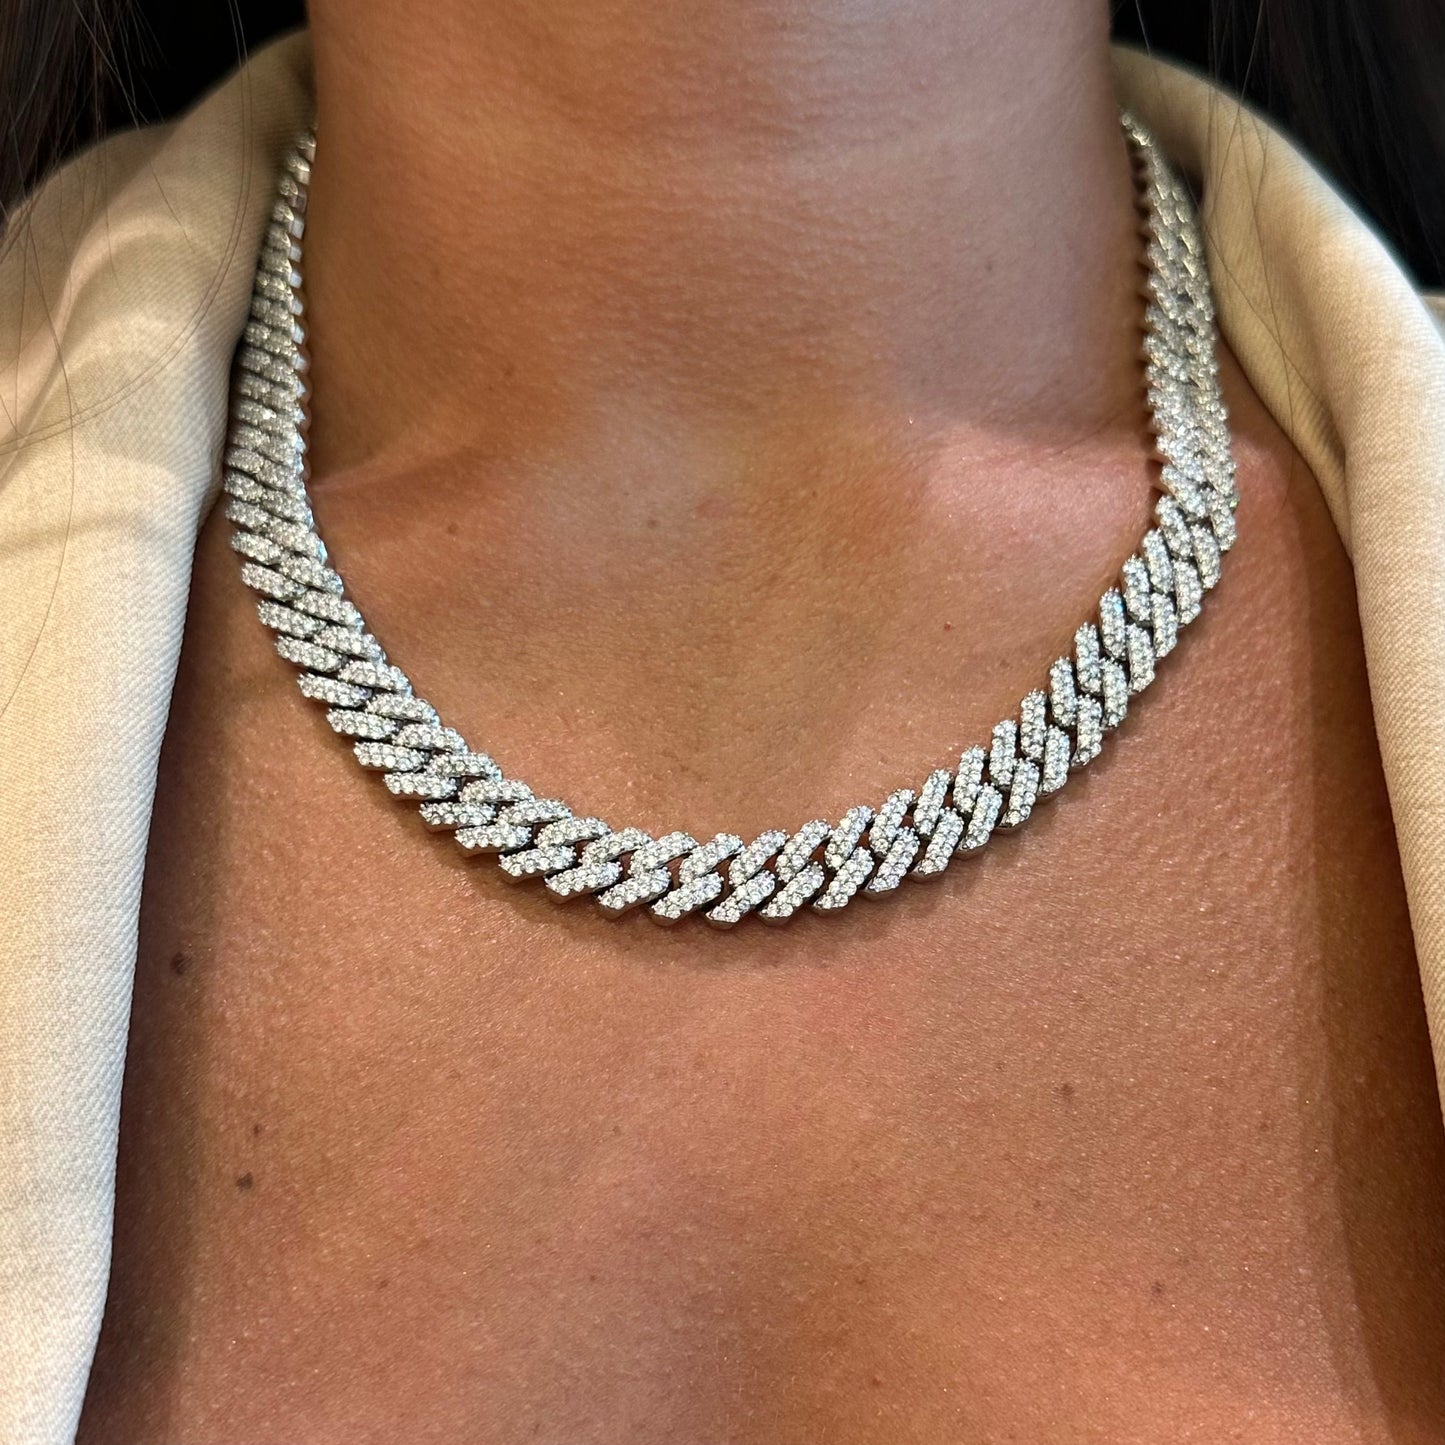 NEW CUBAN LINKS NECKLACE | White Rhodium Plated